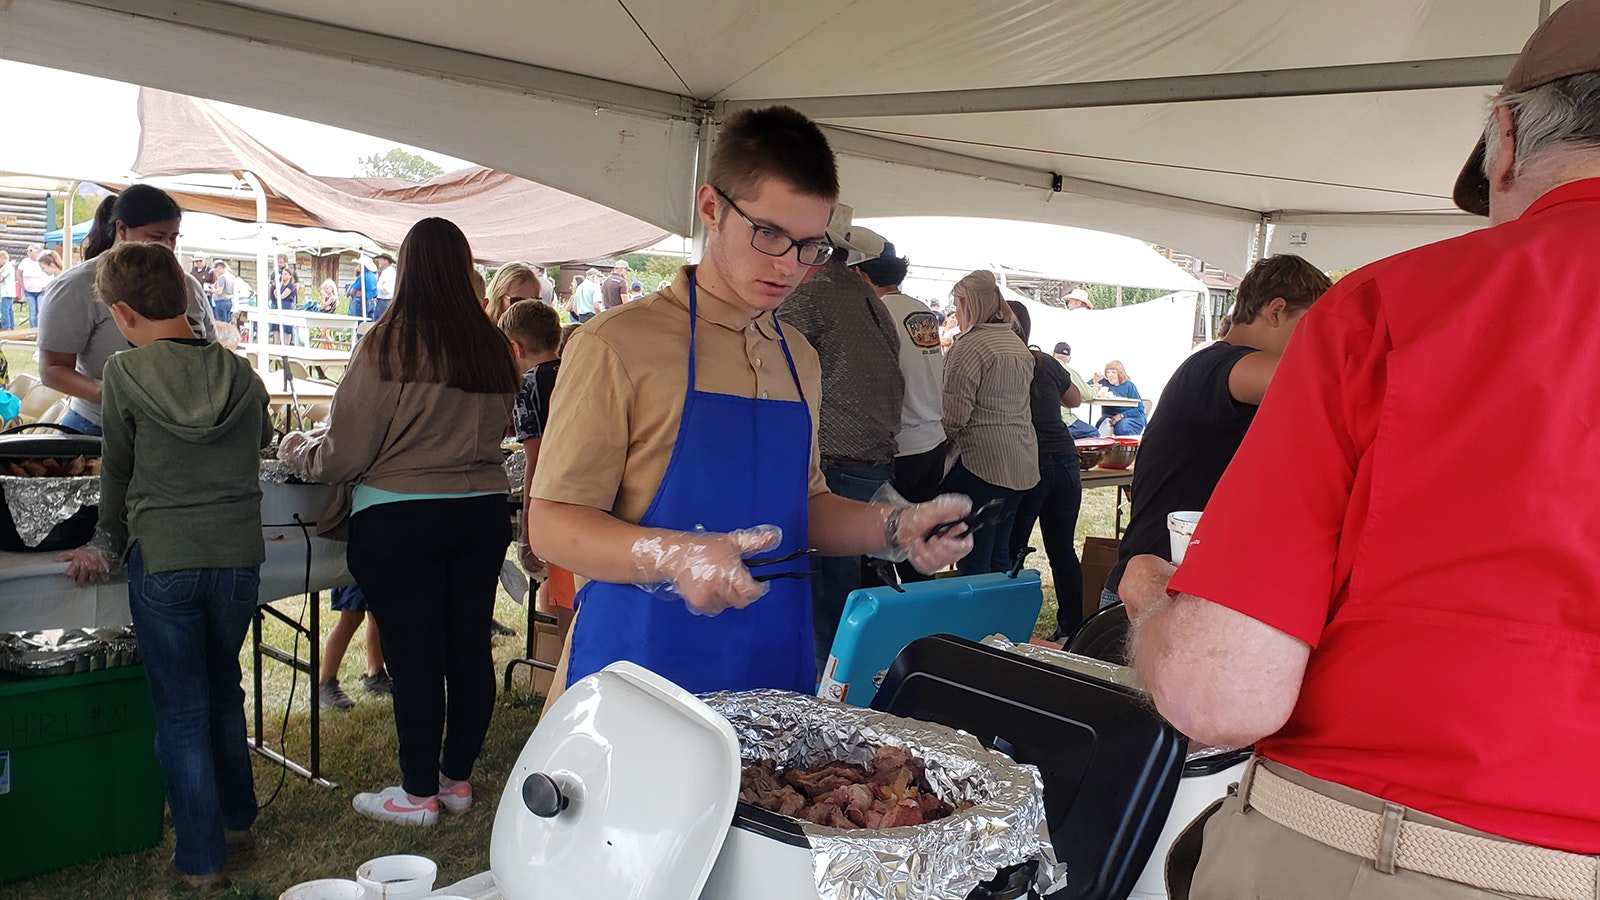 FFA students volunteered to help serve the meat and potluck sides at the Savery picnic.